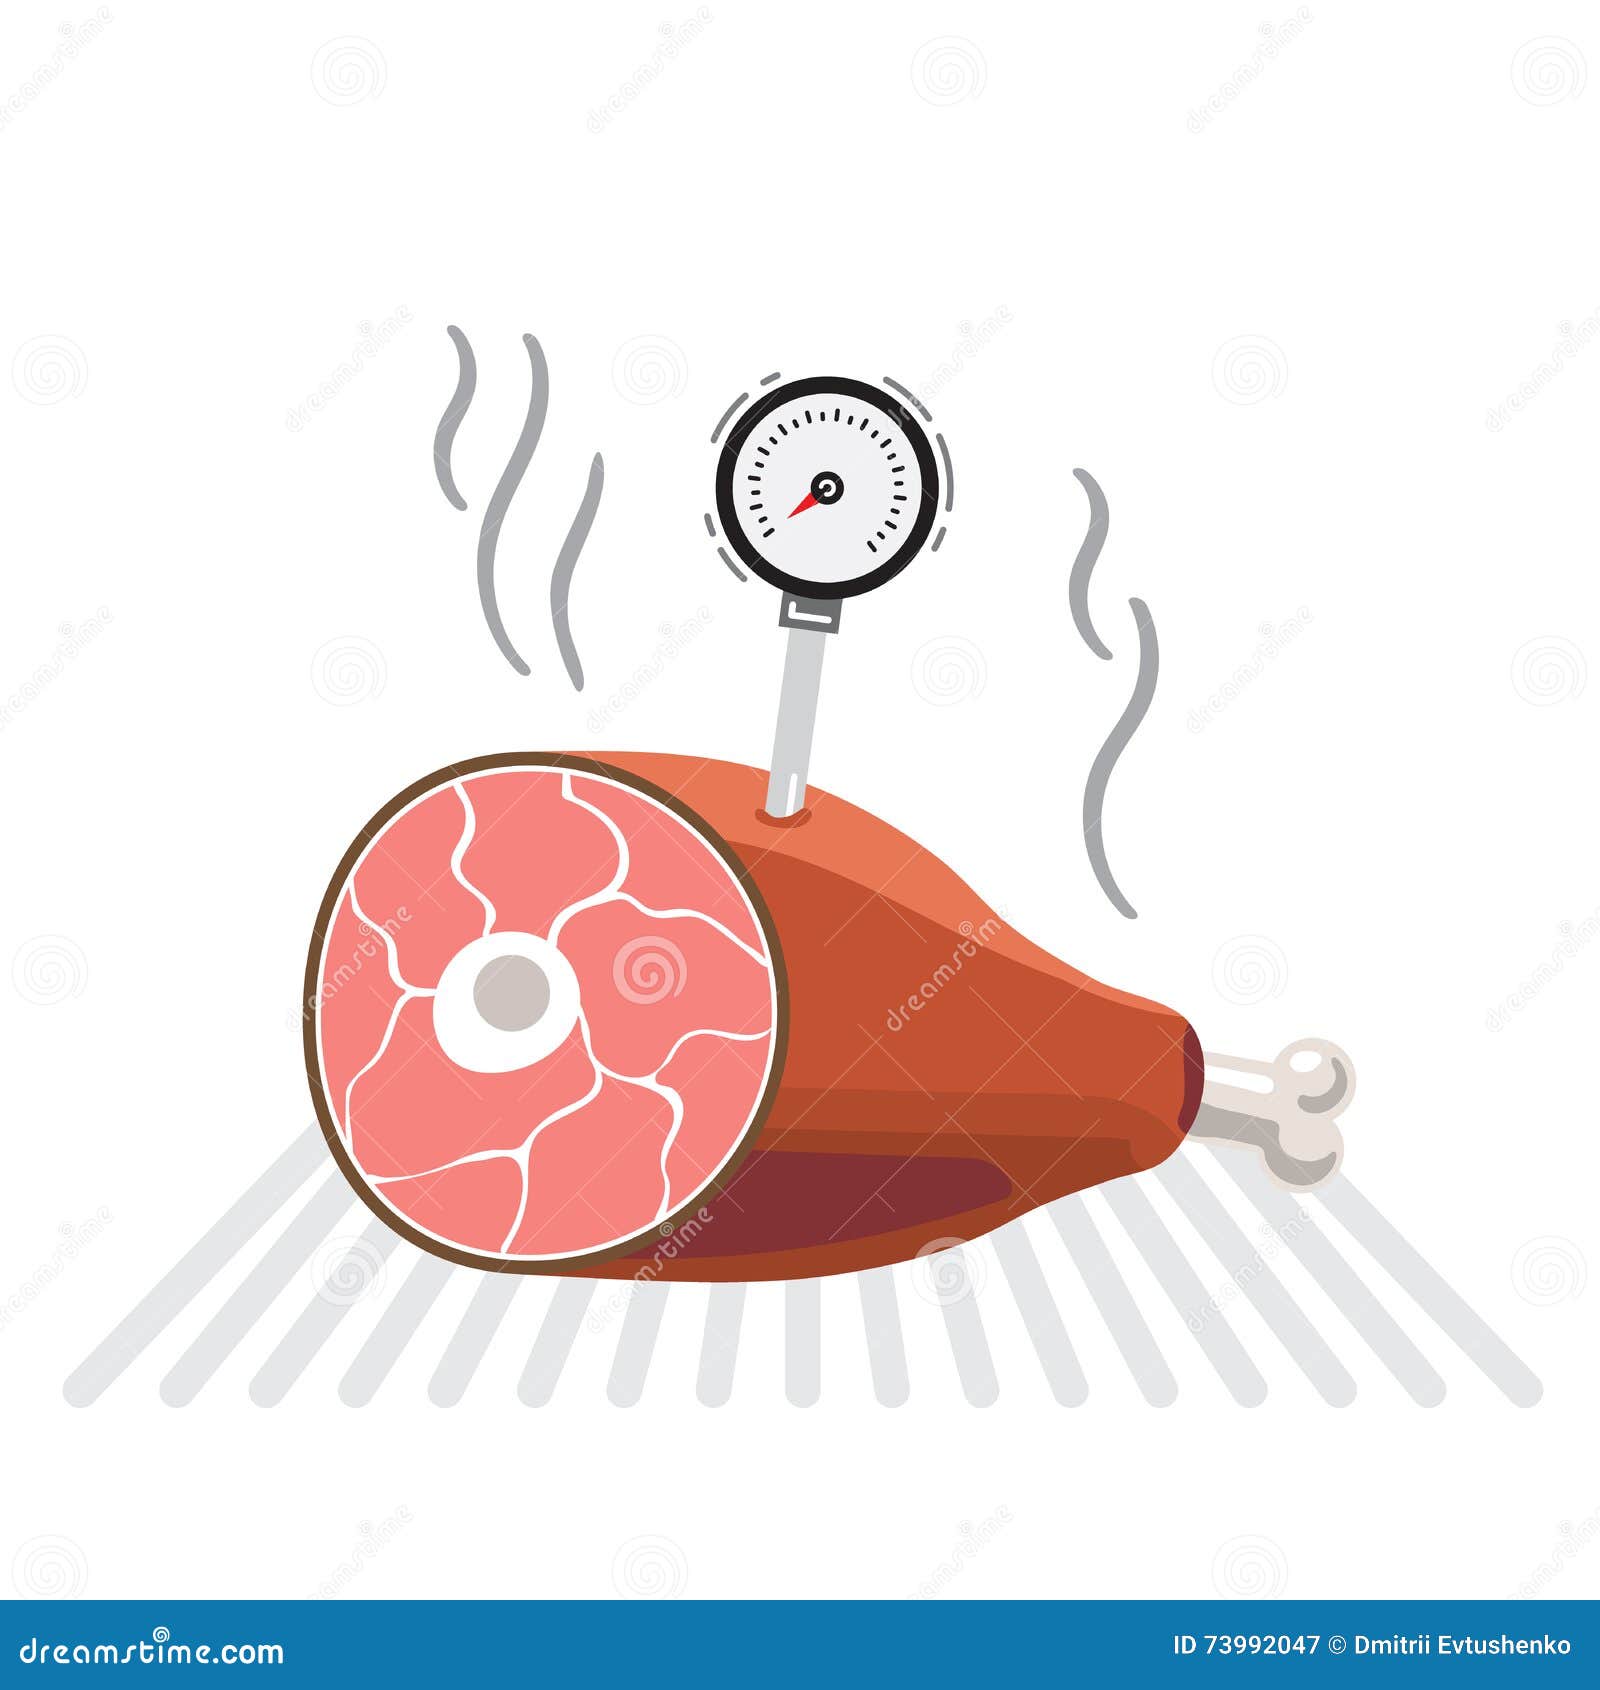 https://thumbs.dreamstime.com/z/thermometer-food-stuck-pig-foot-correct-temperature-cooking-meat-73992047.jpg